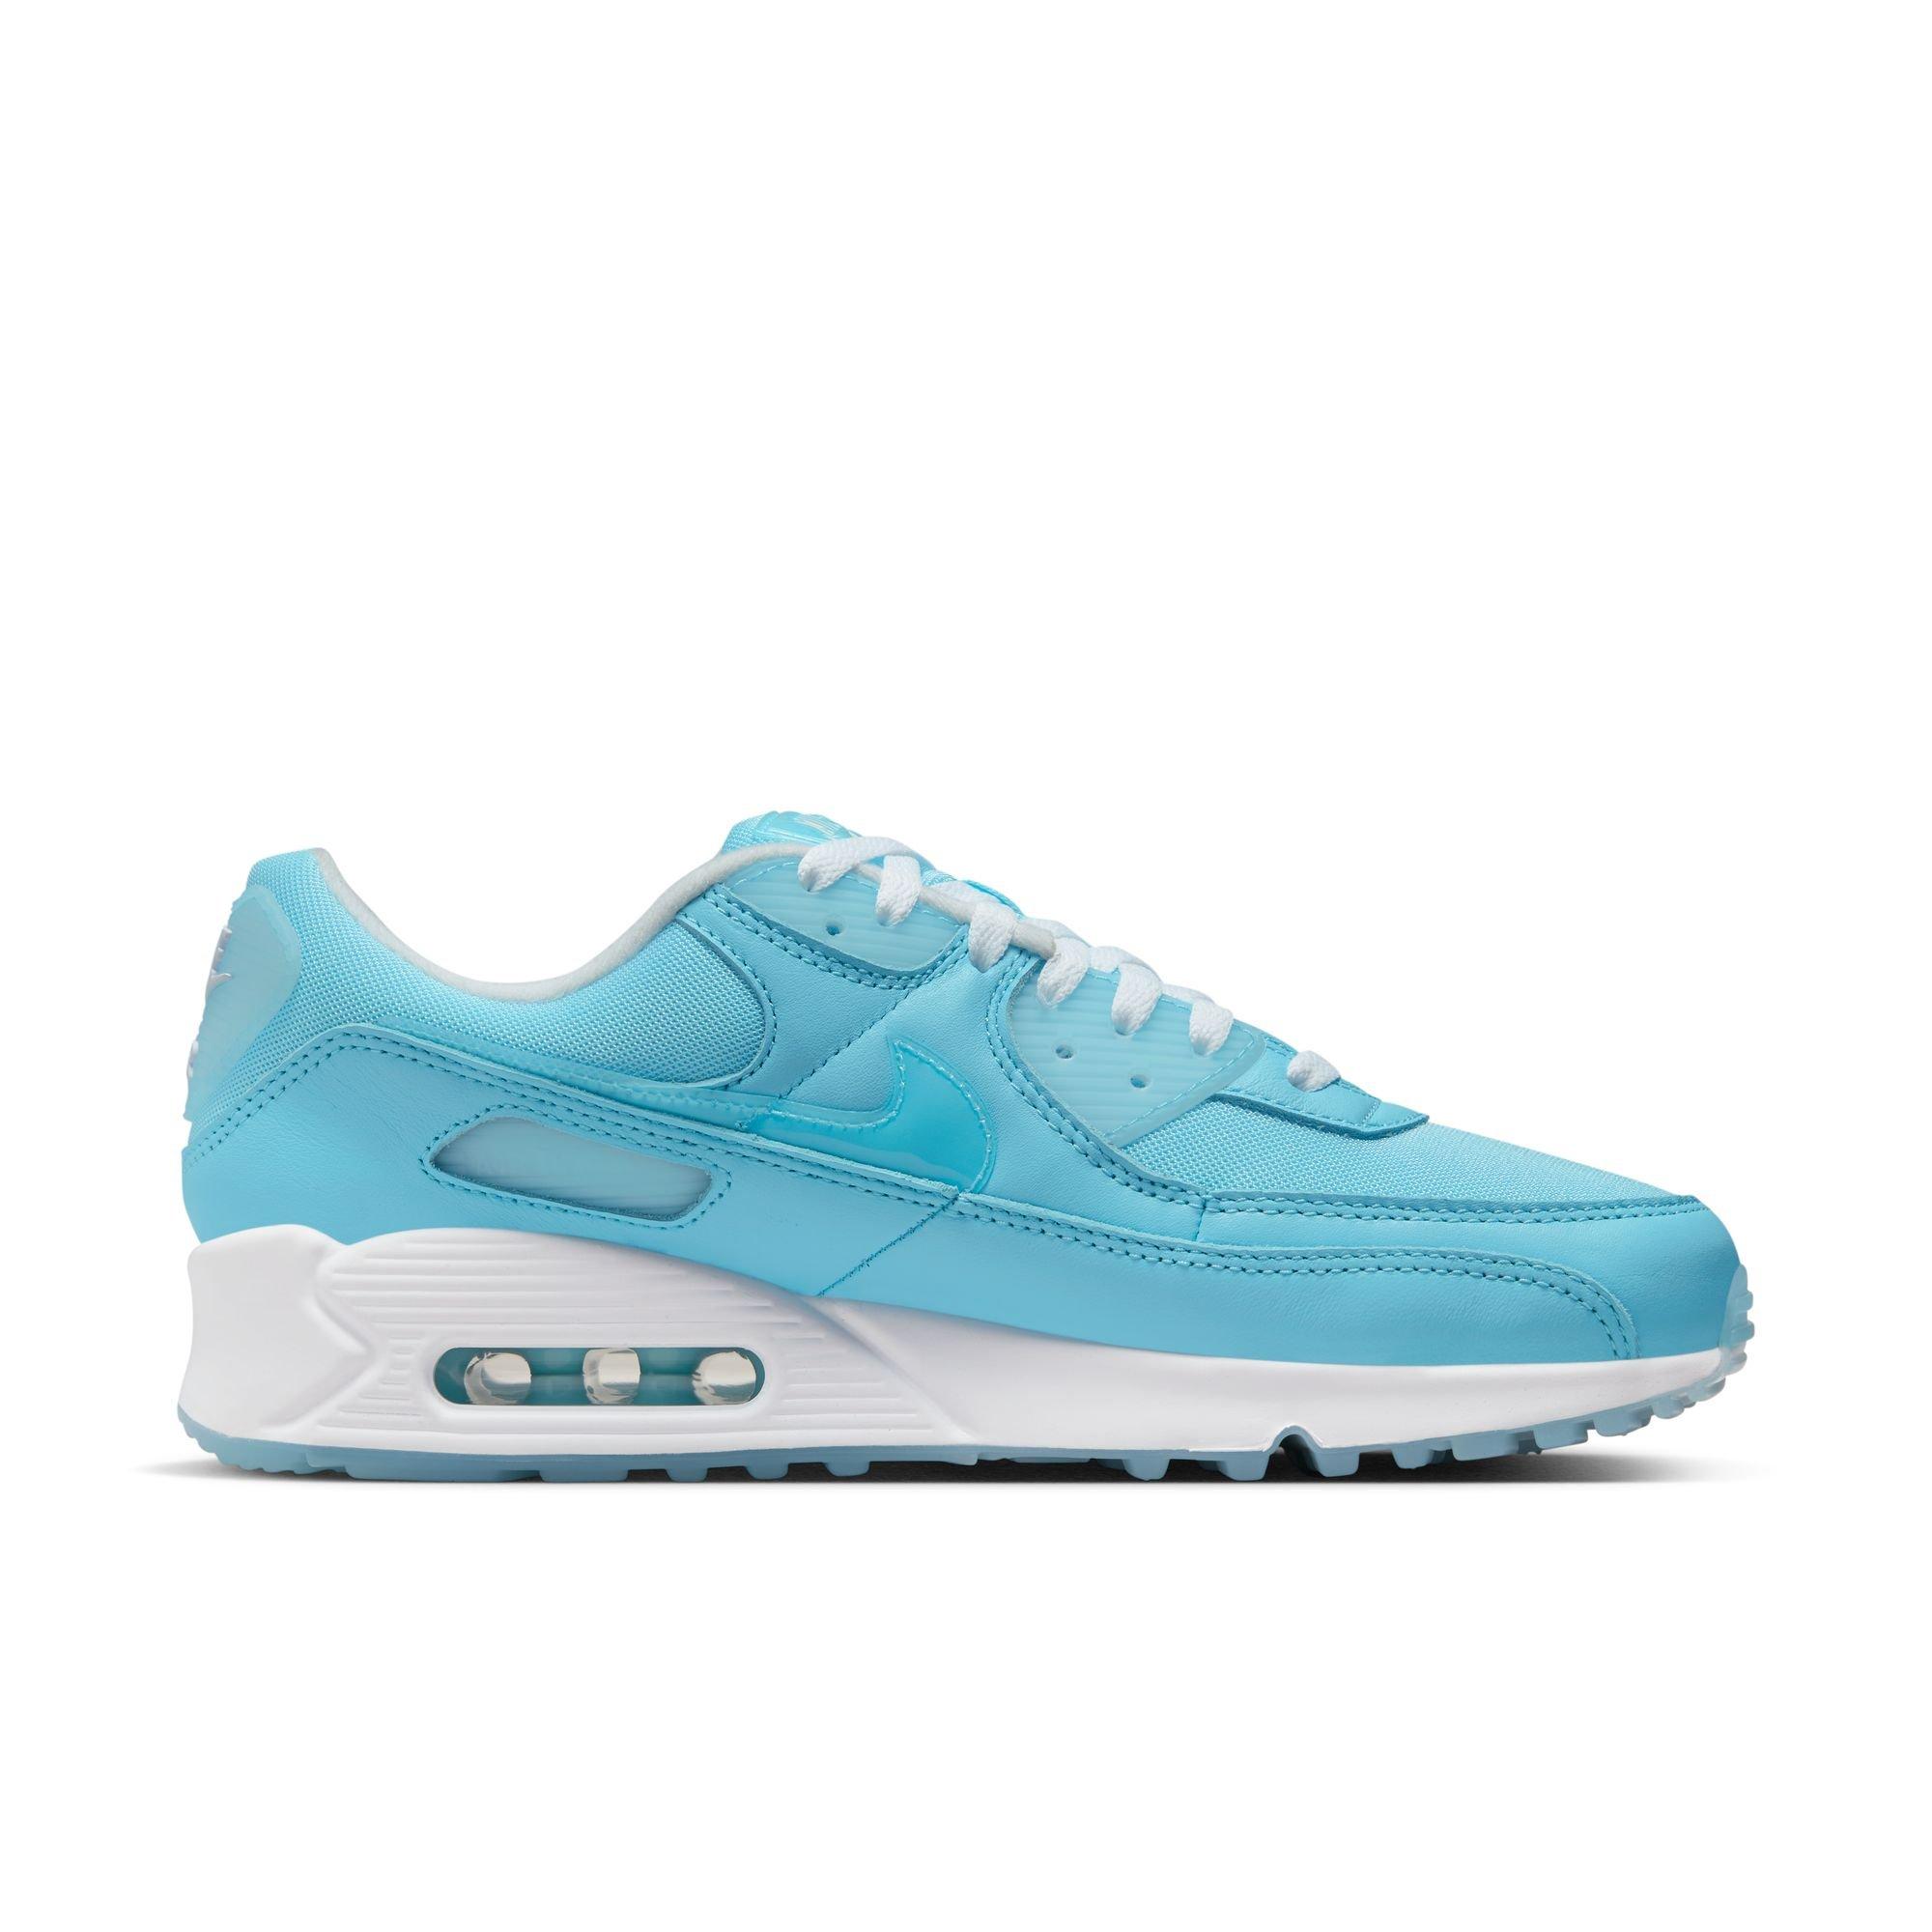 Reageer Broek levend Nike Air Max 90 "Blue Chill/White" Men's Shoe